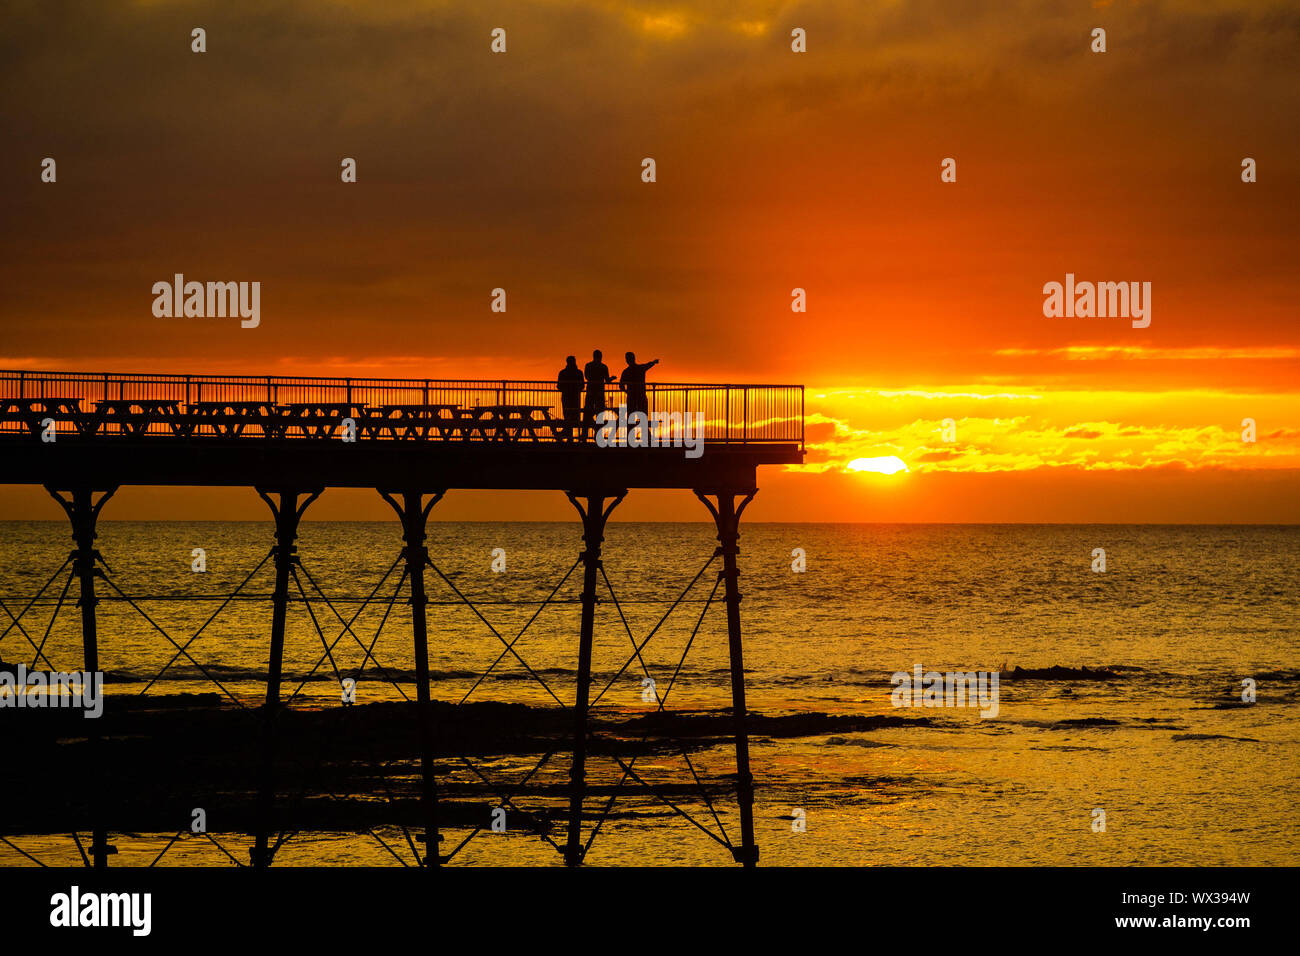 Aberystwyth, UK. 16th Sep, 2019. People standing on Aberystwyth’s Victorian seaside pier are silhouetted as they watch the last rays of the suns as it sets over Cardigan Bay, on a glorious mid autumn evening, The week ahead is expected to be warm and settled with a high pressure system dominating the weather in the southern parts of the UK Credit: keith morris/Alamy Live News Stock Photo